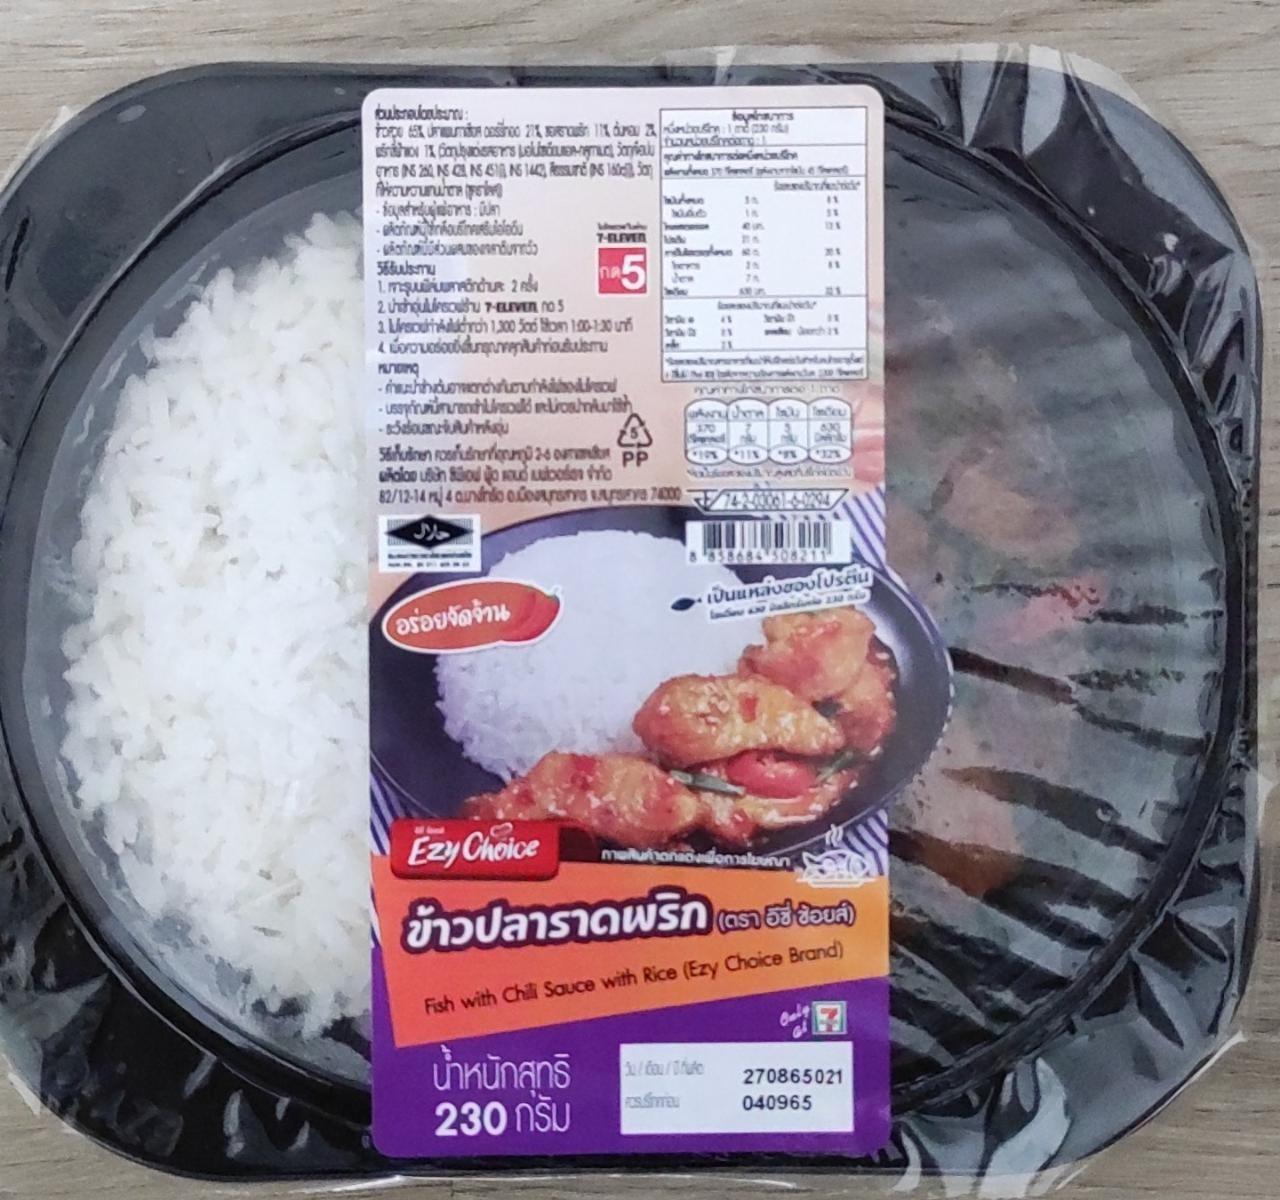 Fotografie - Choice Fish with Chili Sauce with Rice Ezy